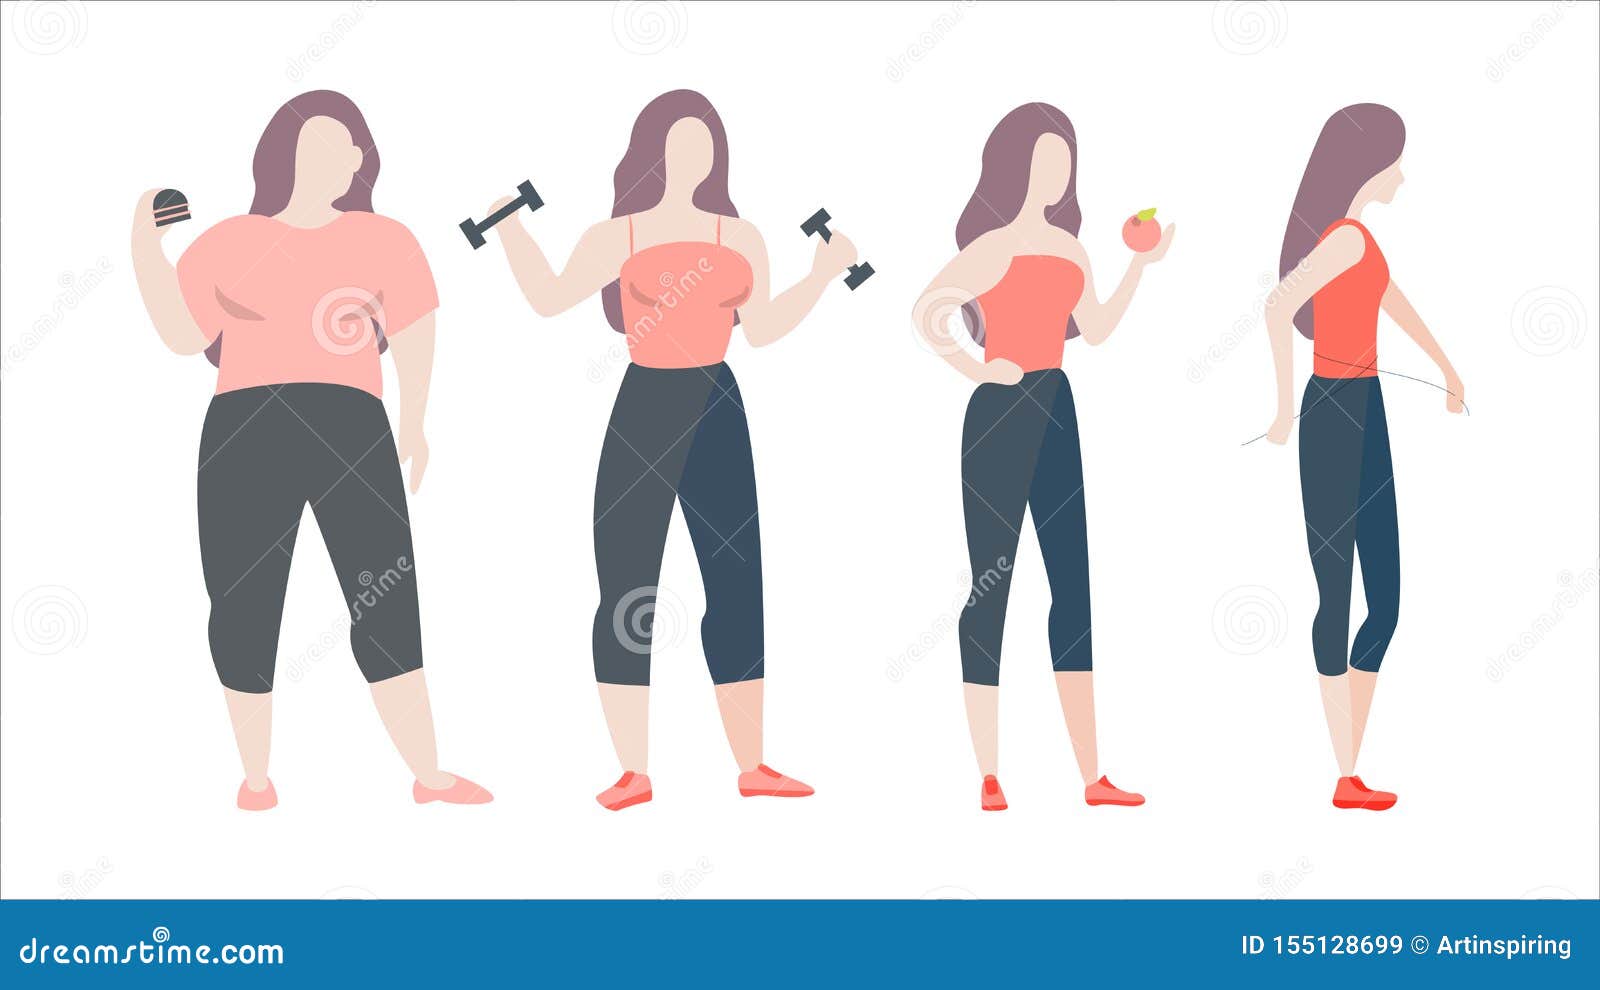 From Fat To Fit Concept. Woman with Obesity Stock Vector - Illustration of  active, slim: 155128699